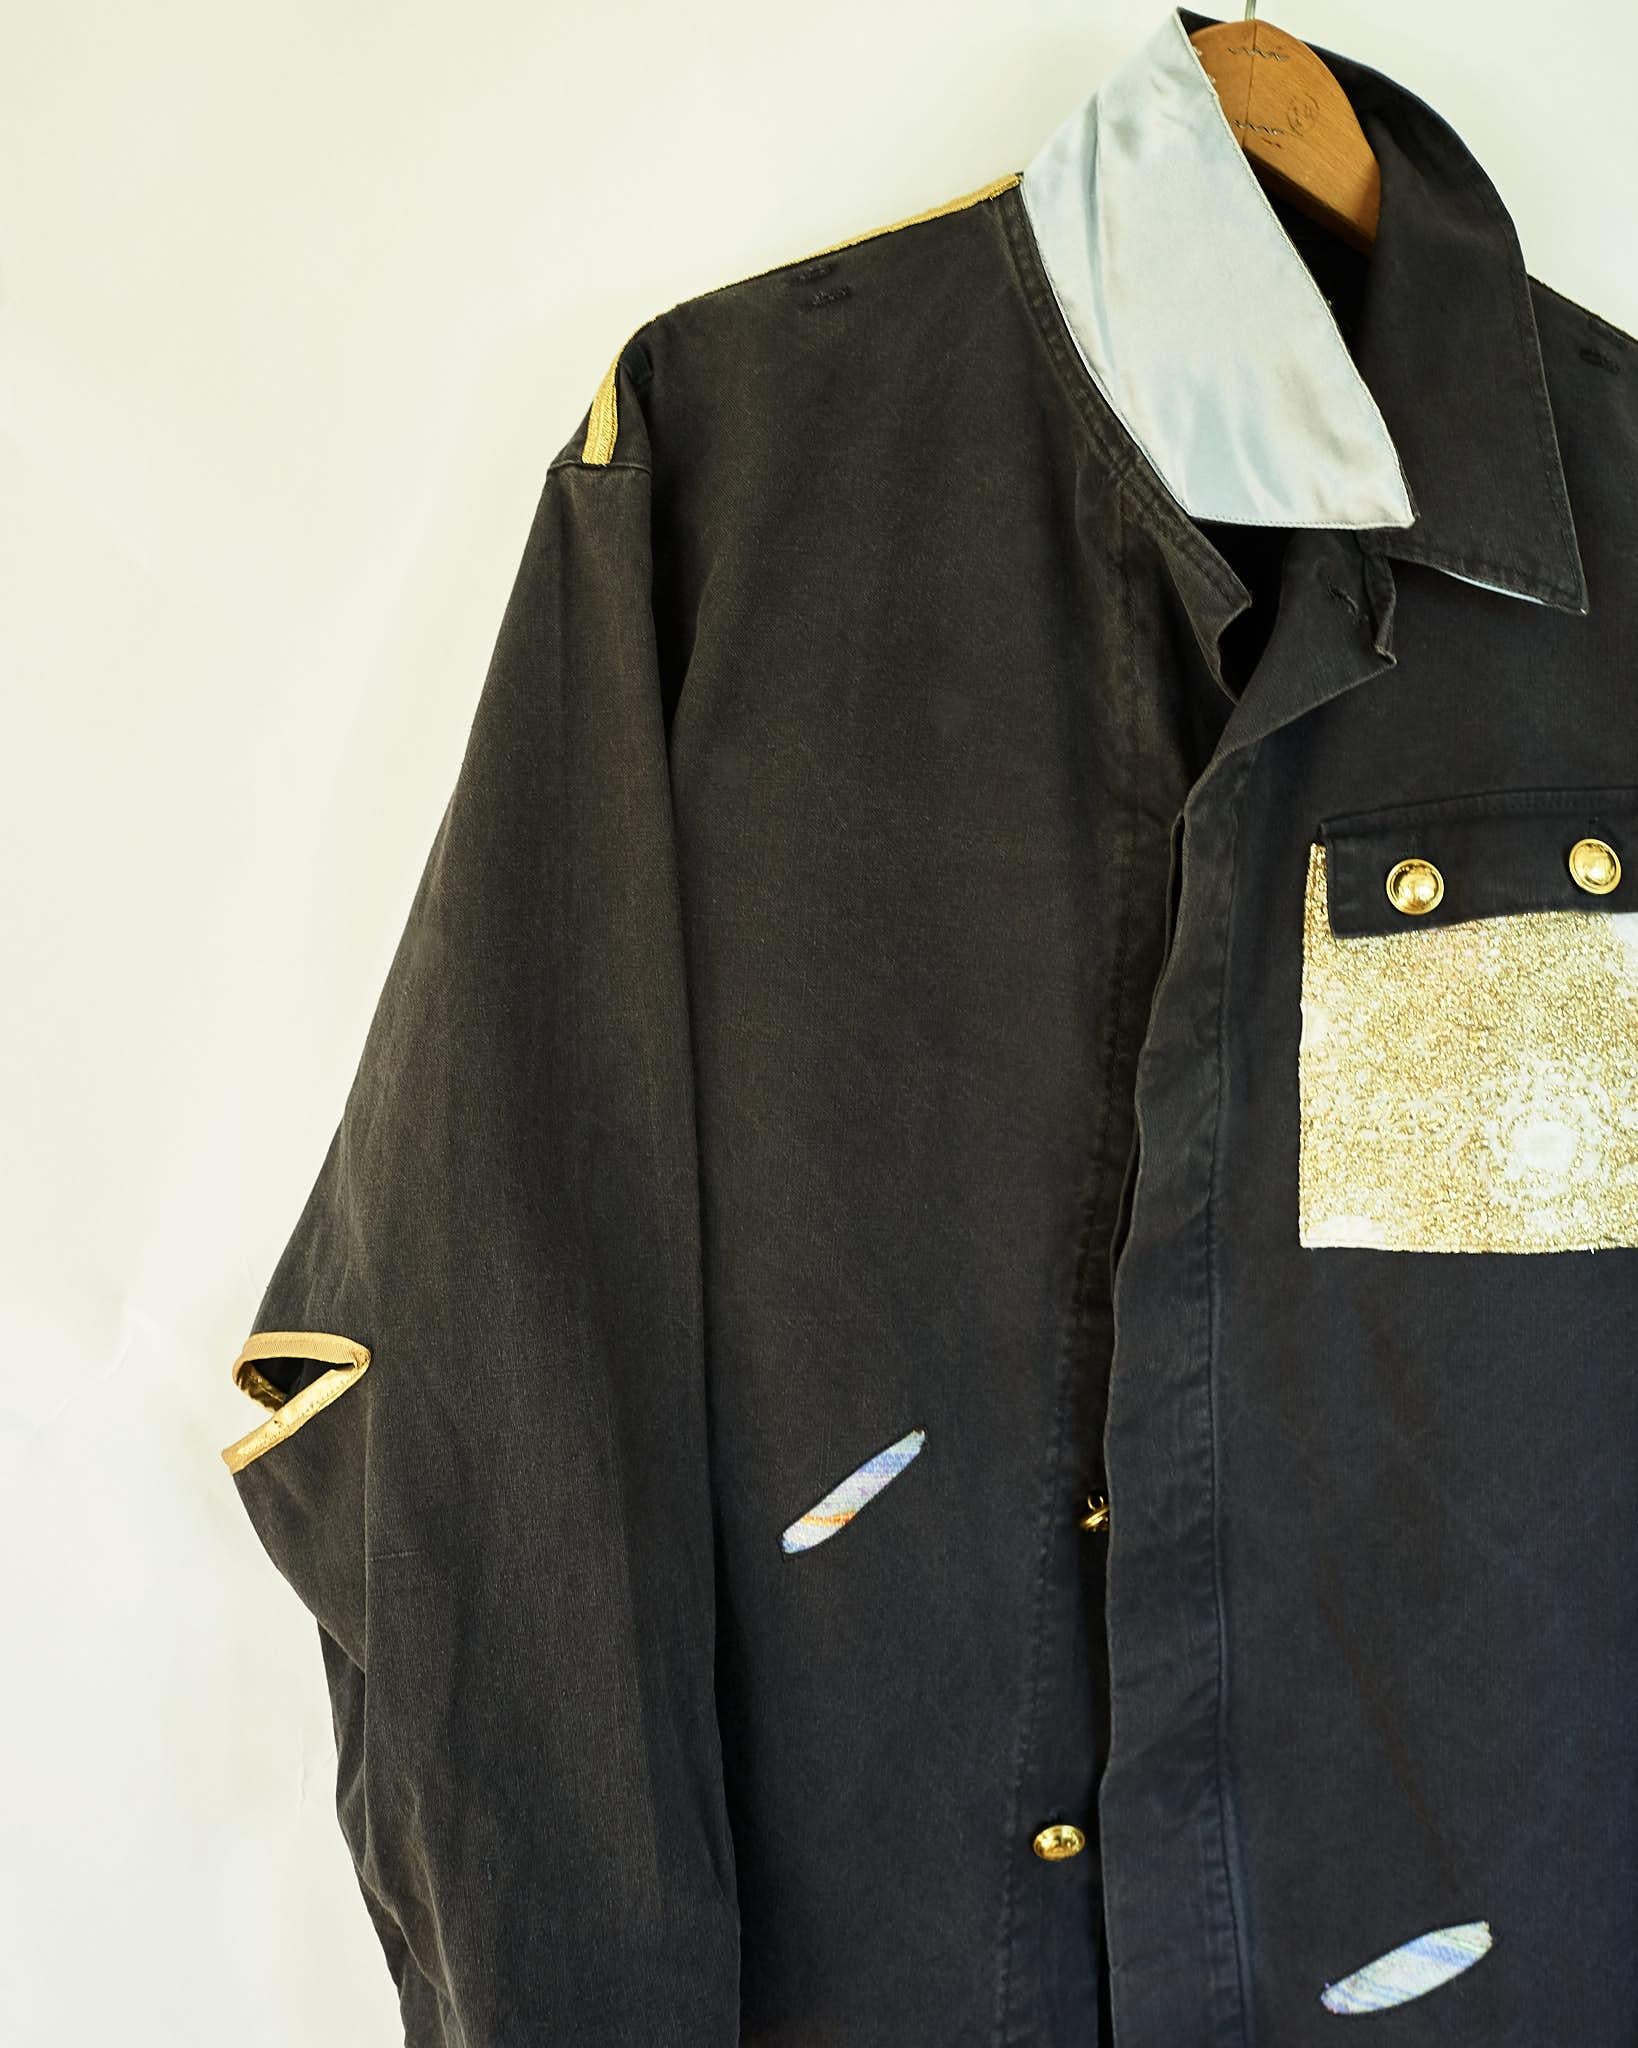 Jacket Grey Oversize Vintage Military Gold Lurex One of a kind J Dauphin

Oversize Vintage Repurposed Military Grey Jacket Gold Lurex Pocket, Light Blue Silk Collar, Open Elbow reinforced with Gold Silk, One of a kind
Brand: J Dauphin
Size: